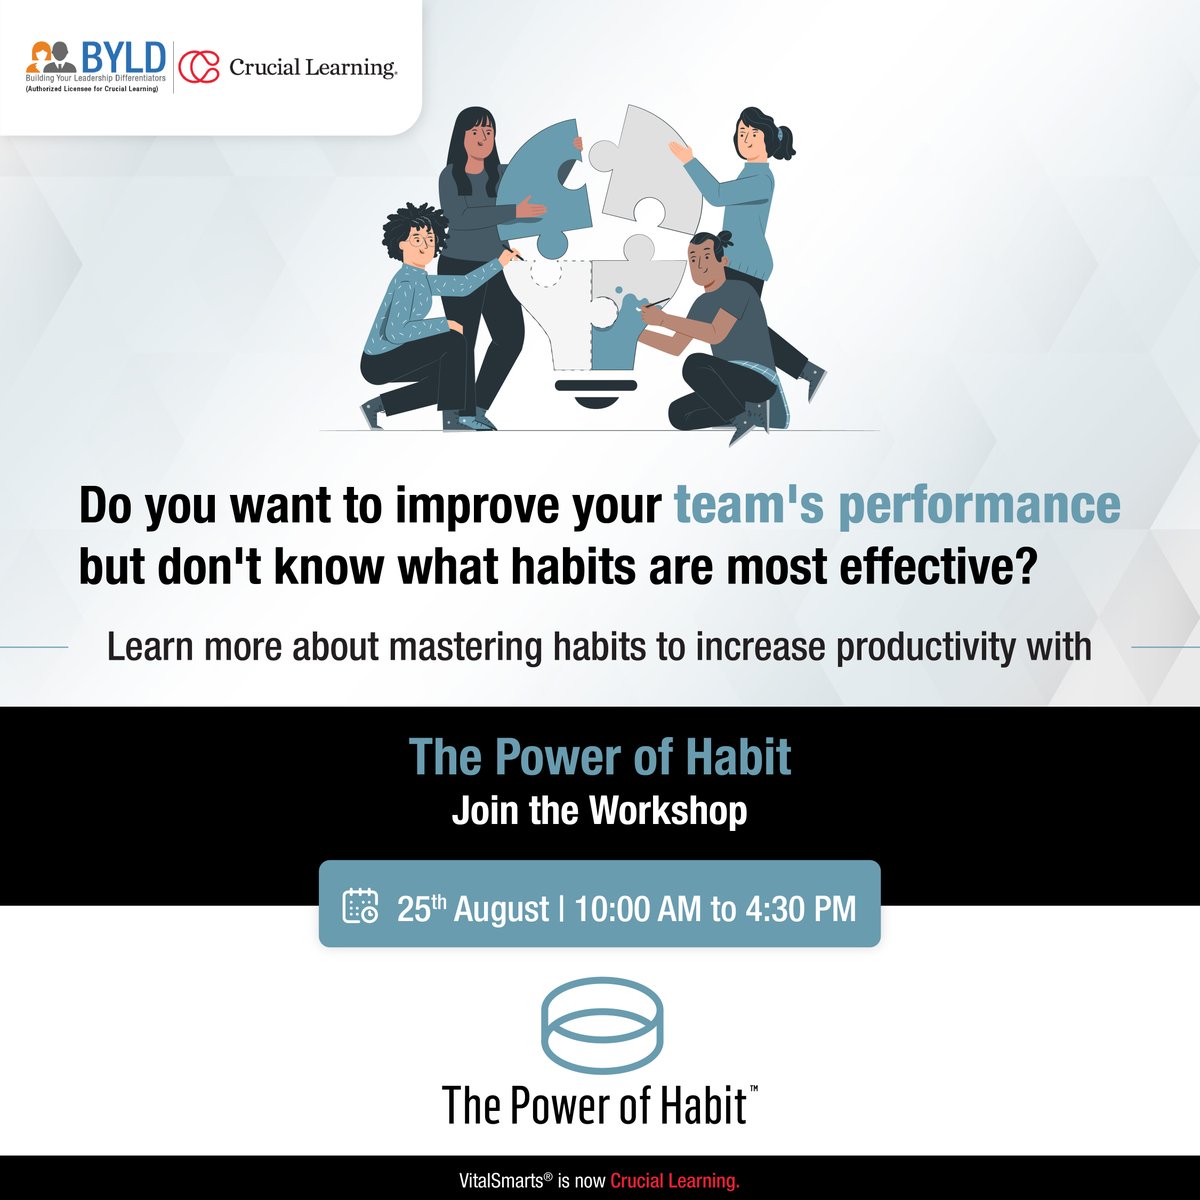 A habit is a behavior that starts as a choice and then becomes a nearly unconscious pattern. 
Join the public workshop to know more: bit.ly/3zYZxq3

#Cruciallifechangingskills #CrucialLearning #powerofhabit #habit #goodhabit #onehabit #improvement #selfimprovement